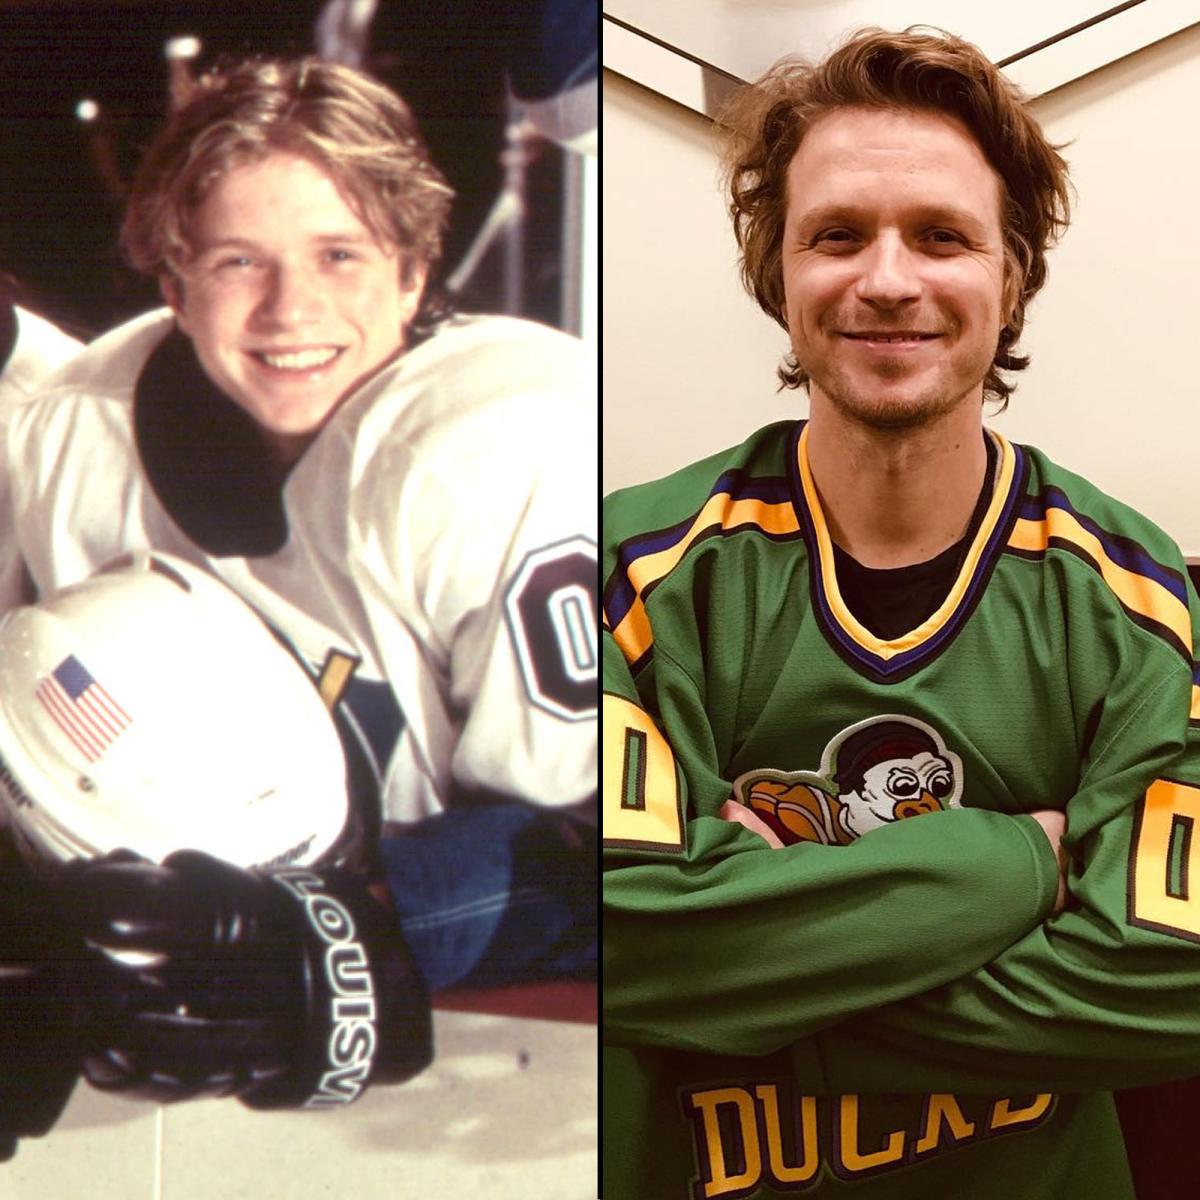 Canucks players meet cast of the Mighty Ducks movie